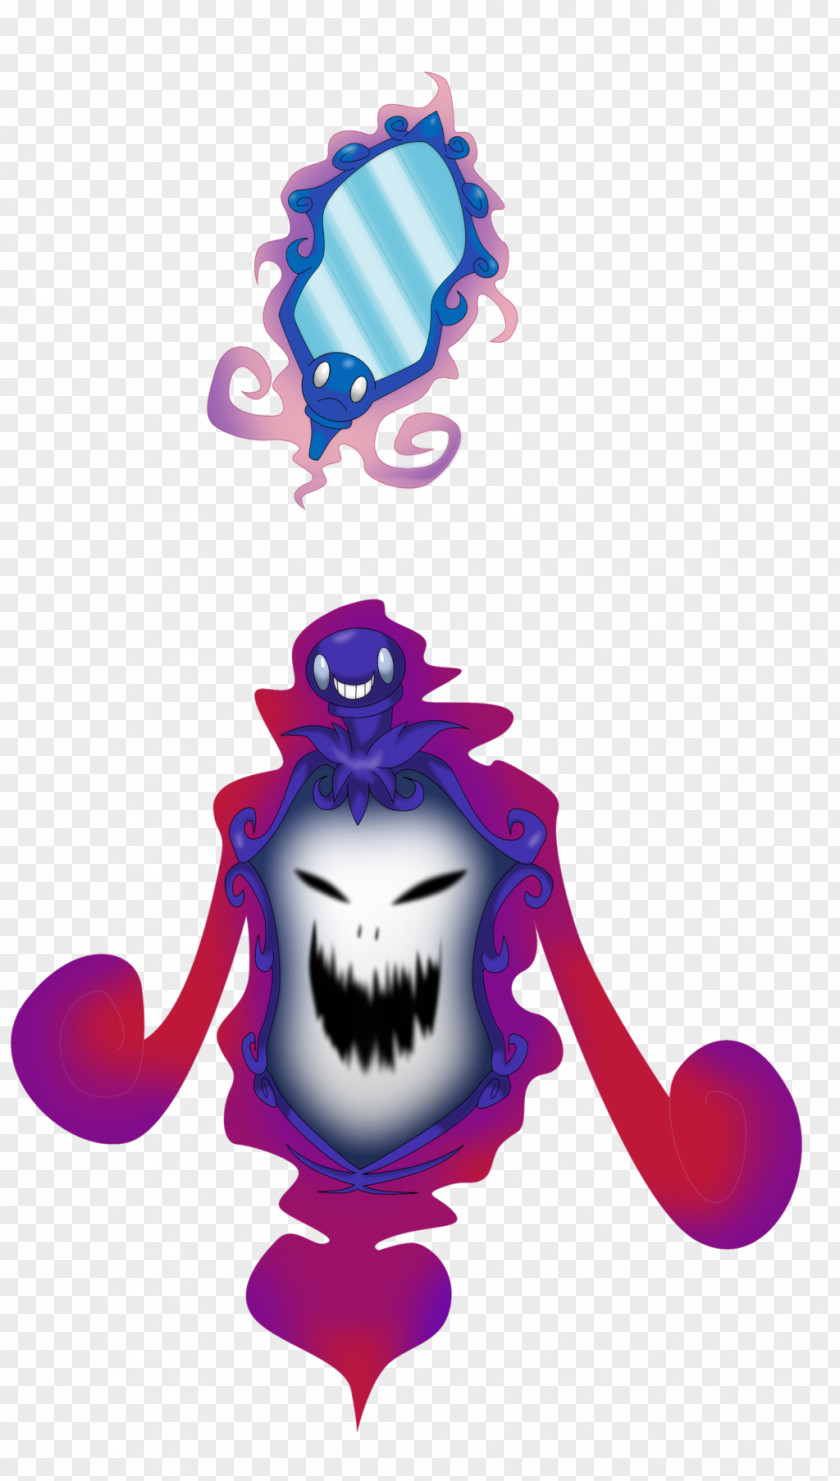 Scared Looking In Mirror DeviantArt Pokémon Illustration Image Haunted House PNG